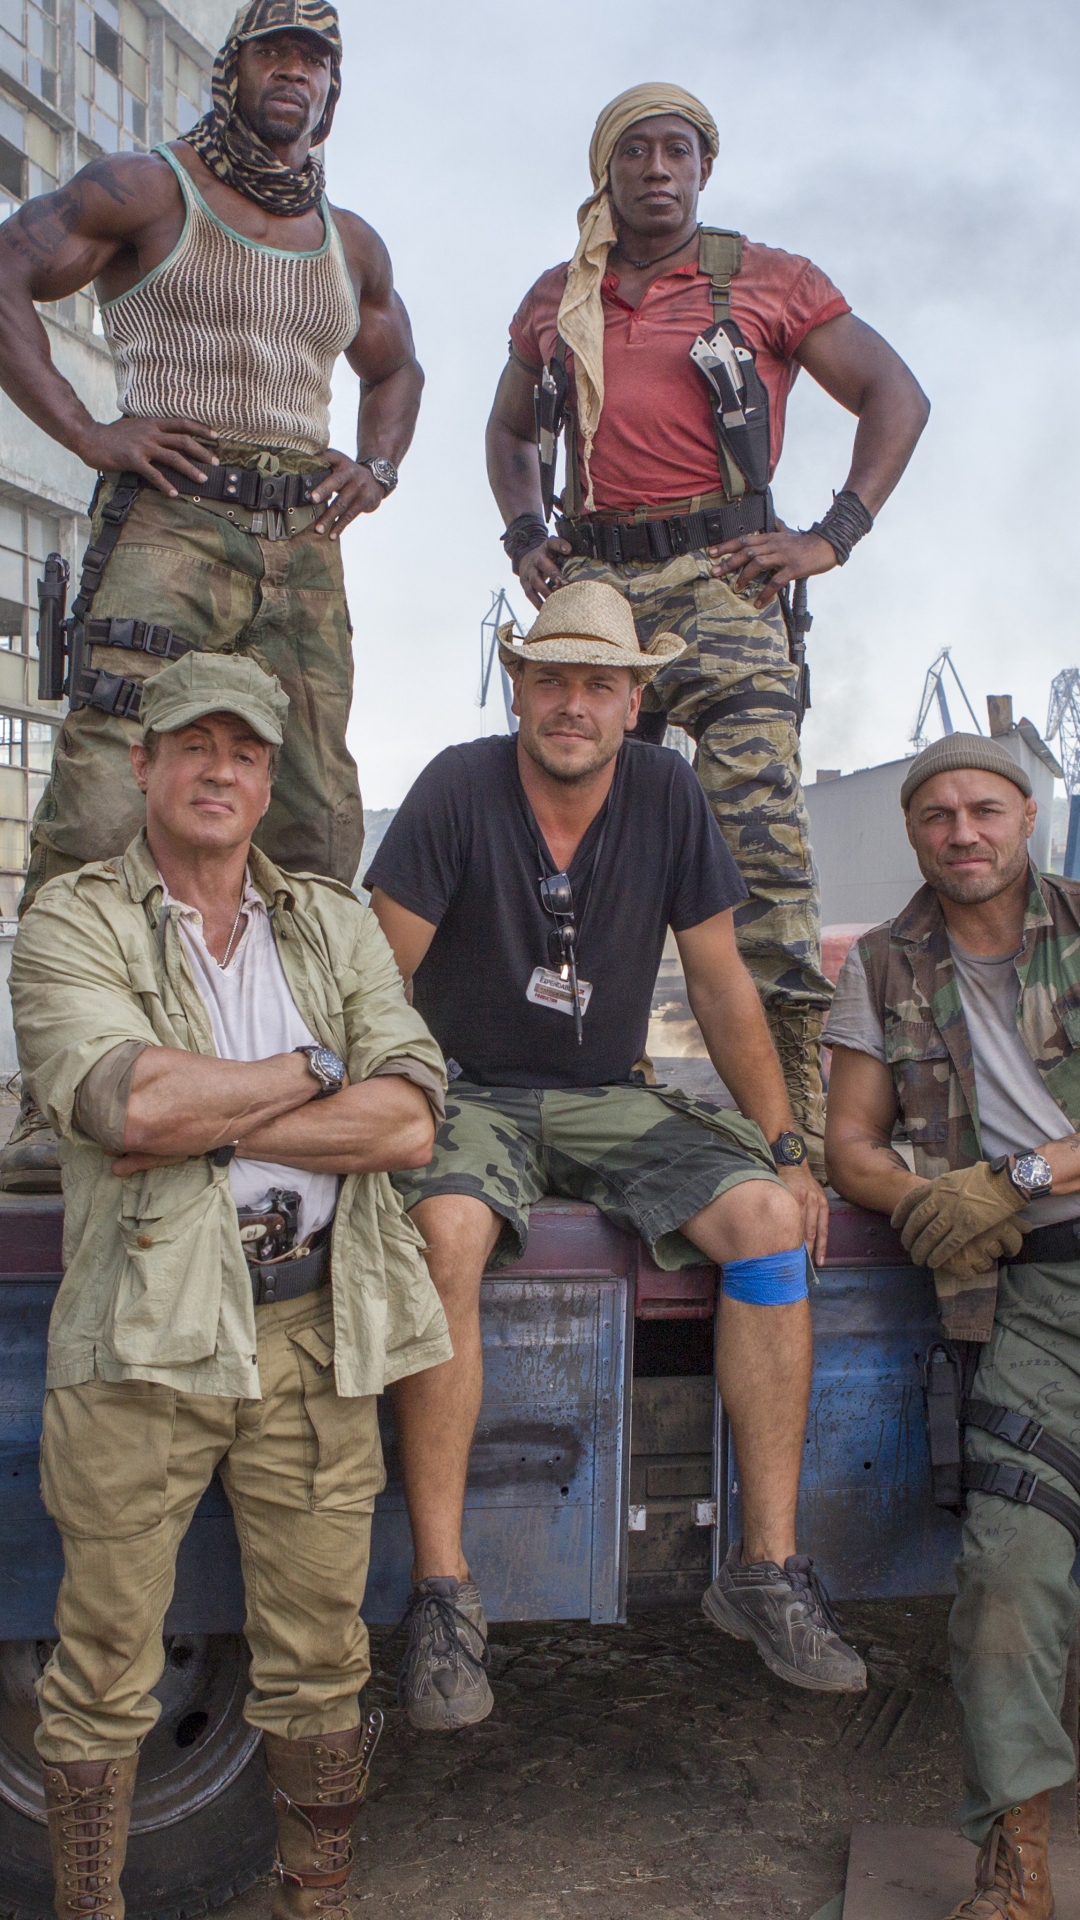 movie, the expendables 3, randy couture, sylvester stallone, dolph lundgren, jason statham, terry crews, hale caesar, barney ross, lee christmas, gunnar jensen, toll road, the expendables